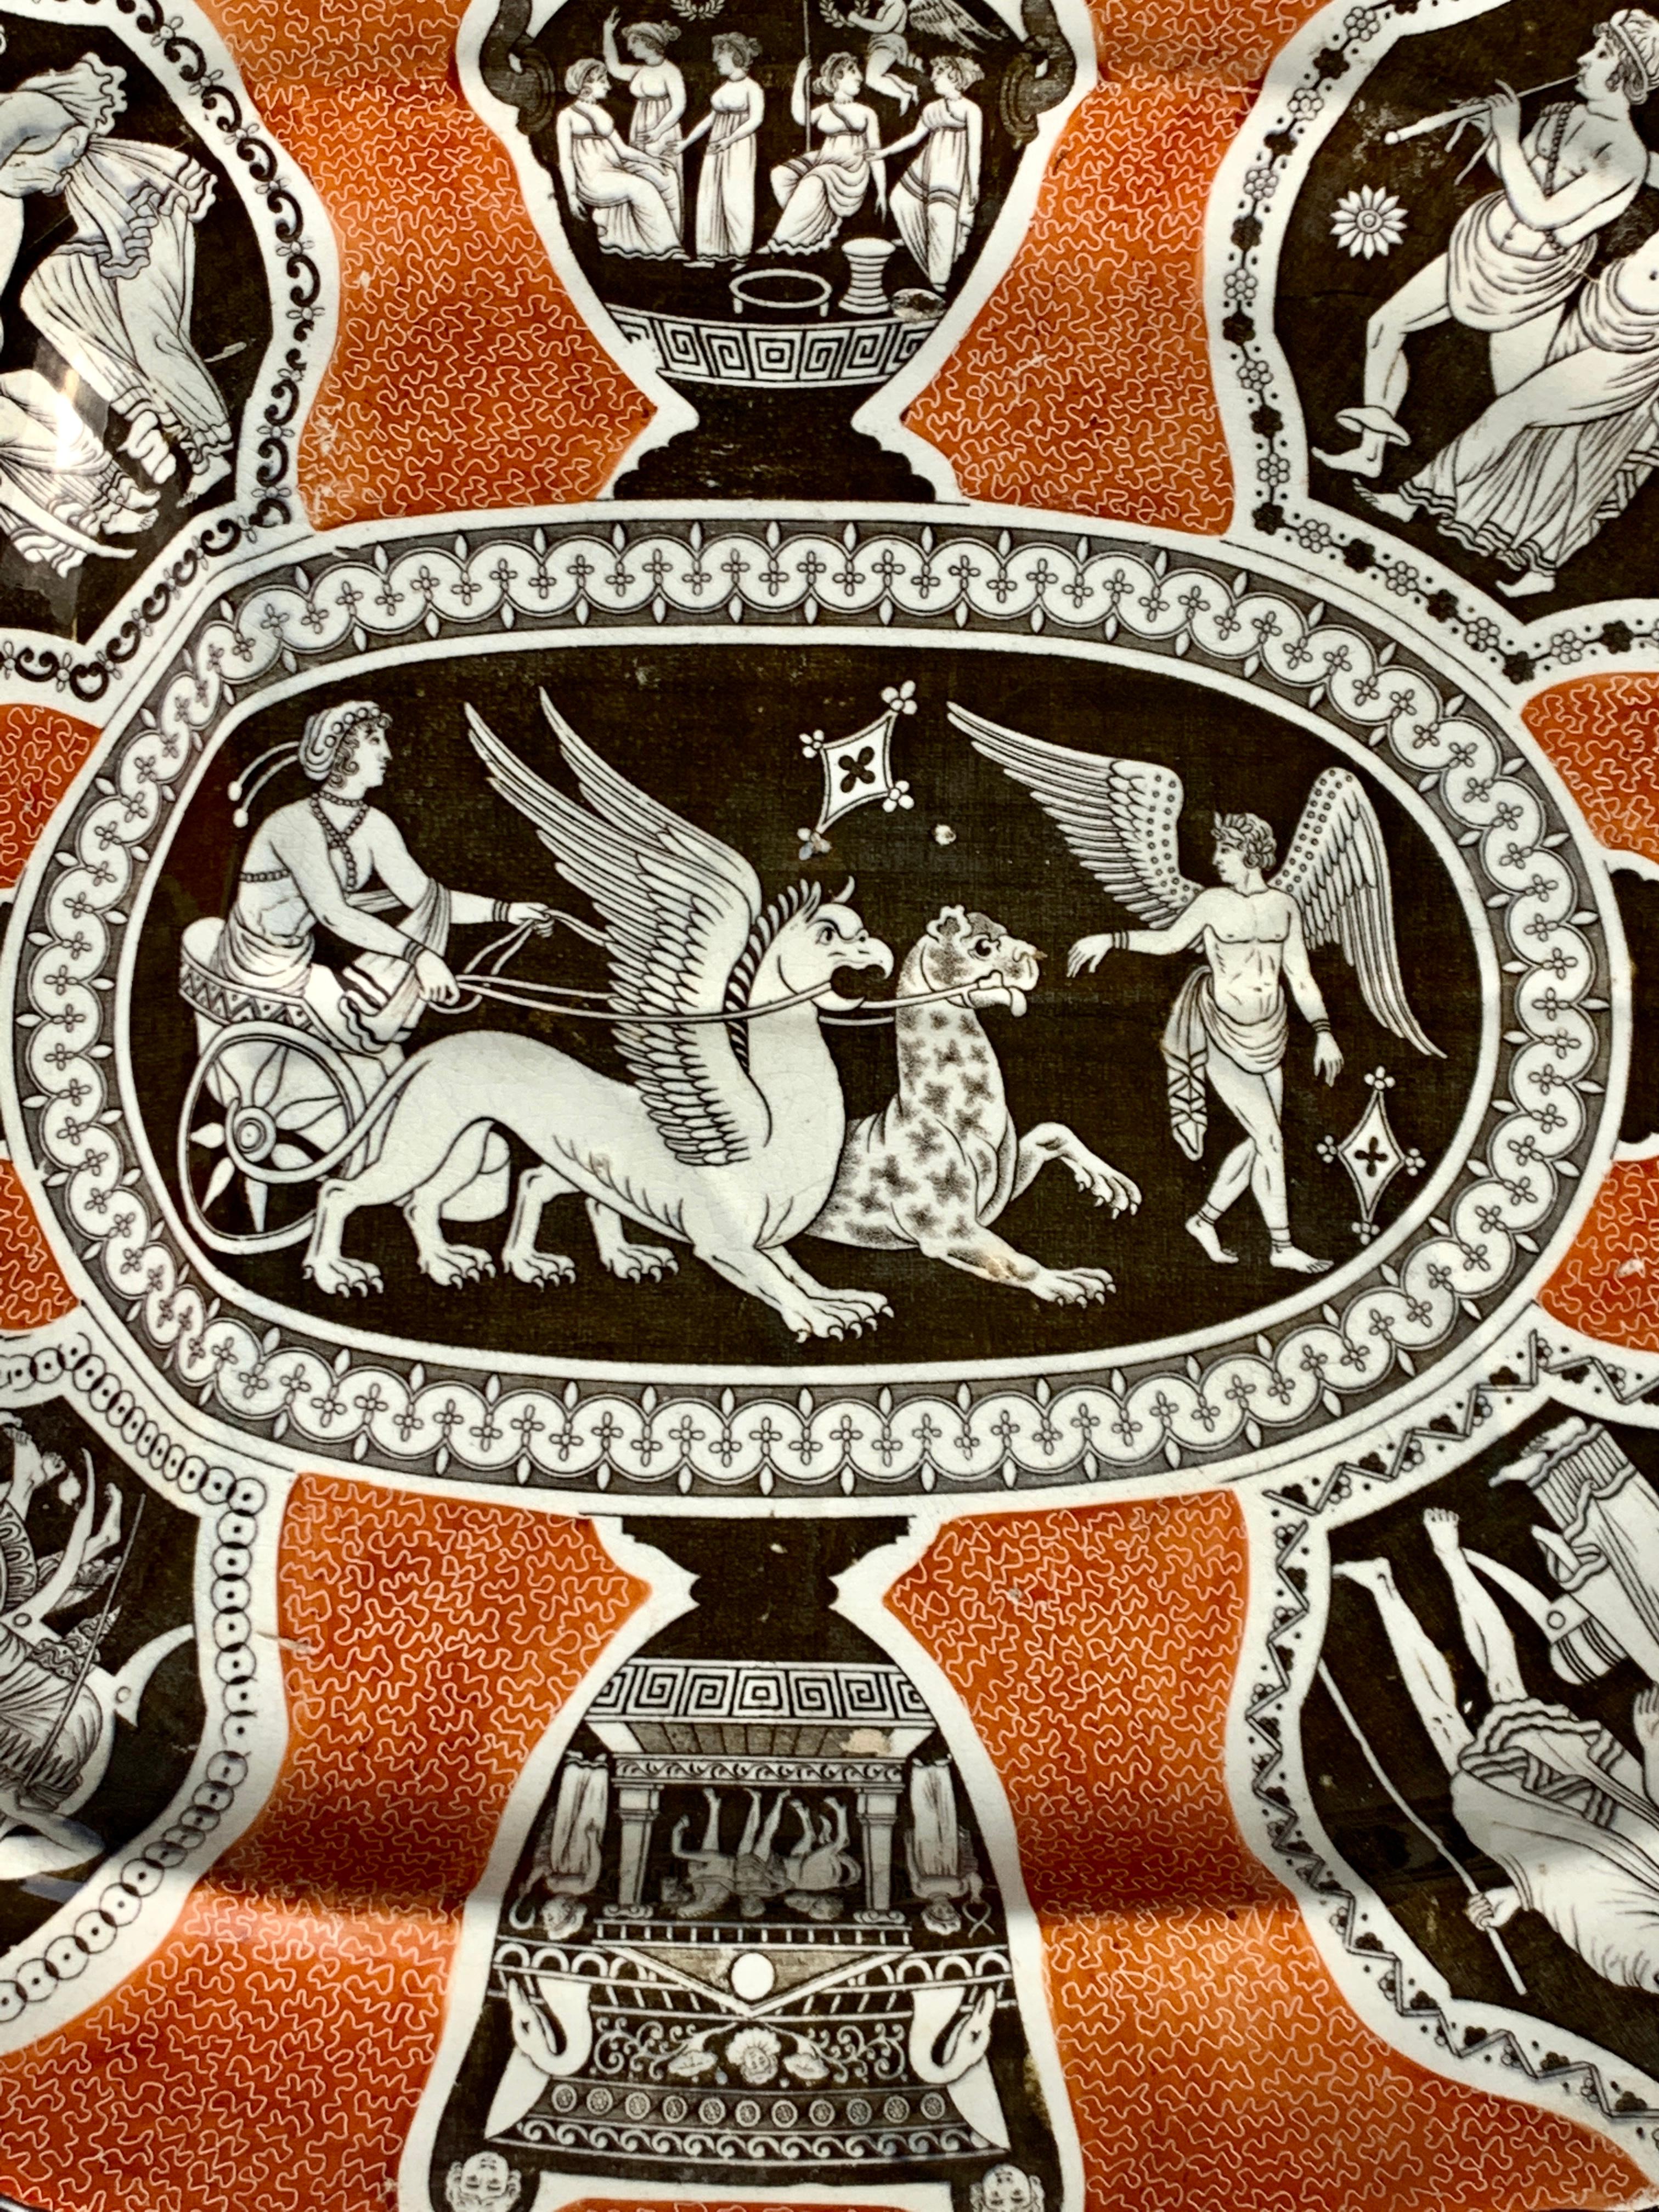 This exquisite Spode Greek ware platter with well and tree was made in England circa 1820.
The platter displays a rare combination of colors: brown on iron red.

The fabulous center scene is known as 